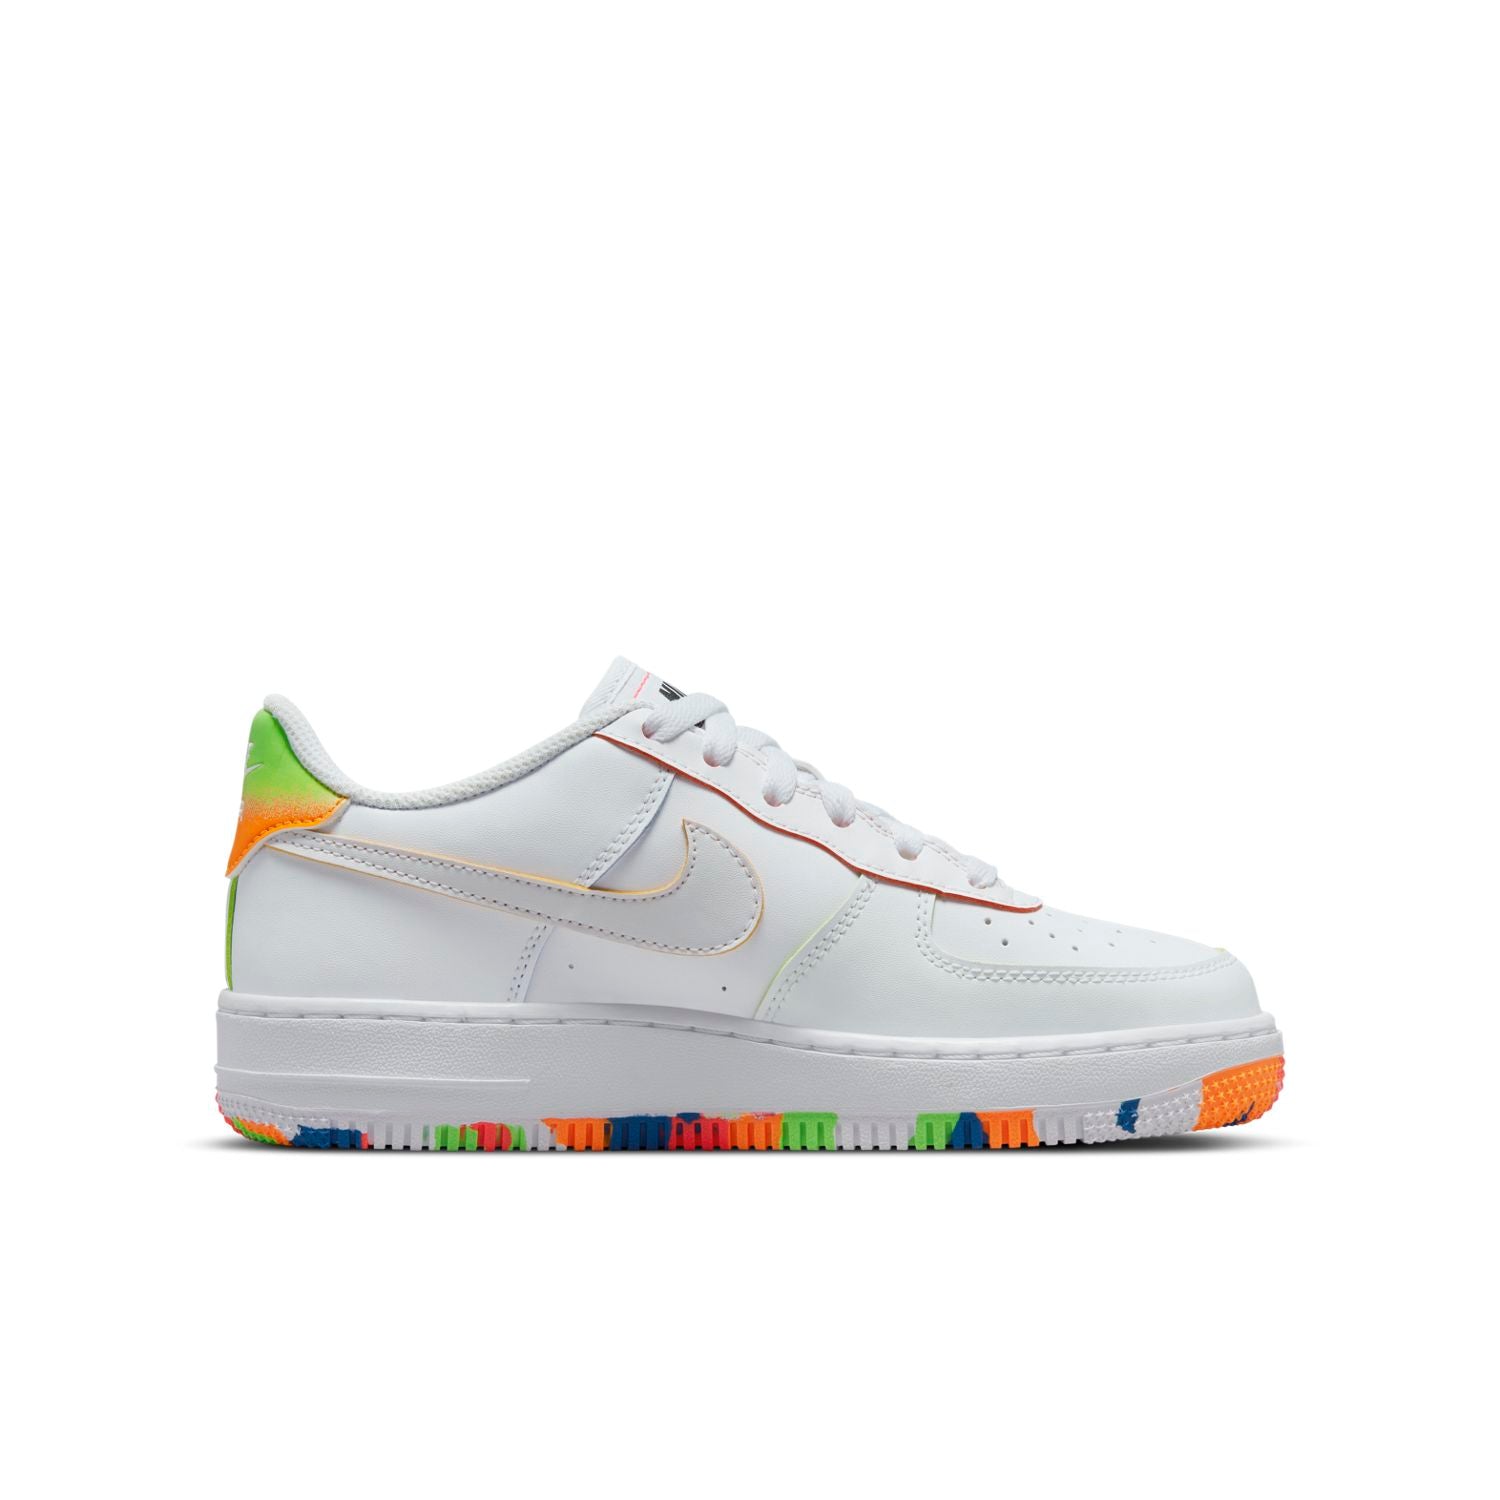 PS Nike Air Force 1 LV8 - 'White/Green Abyss